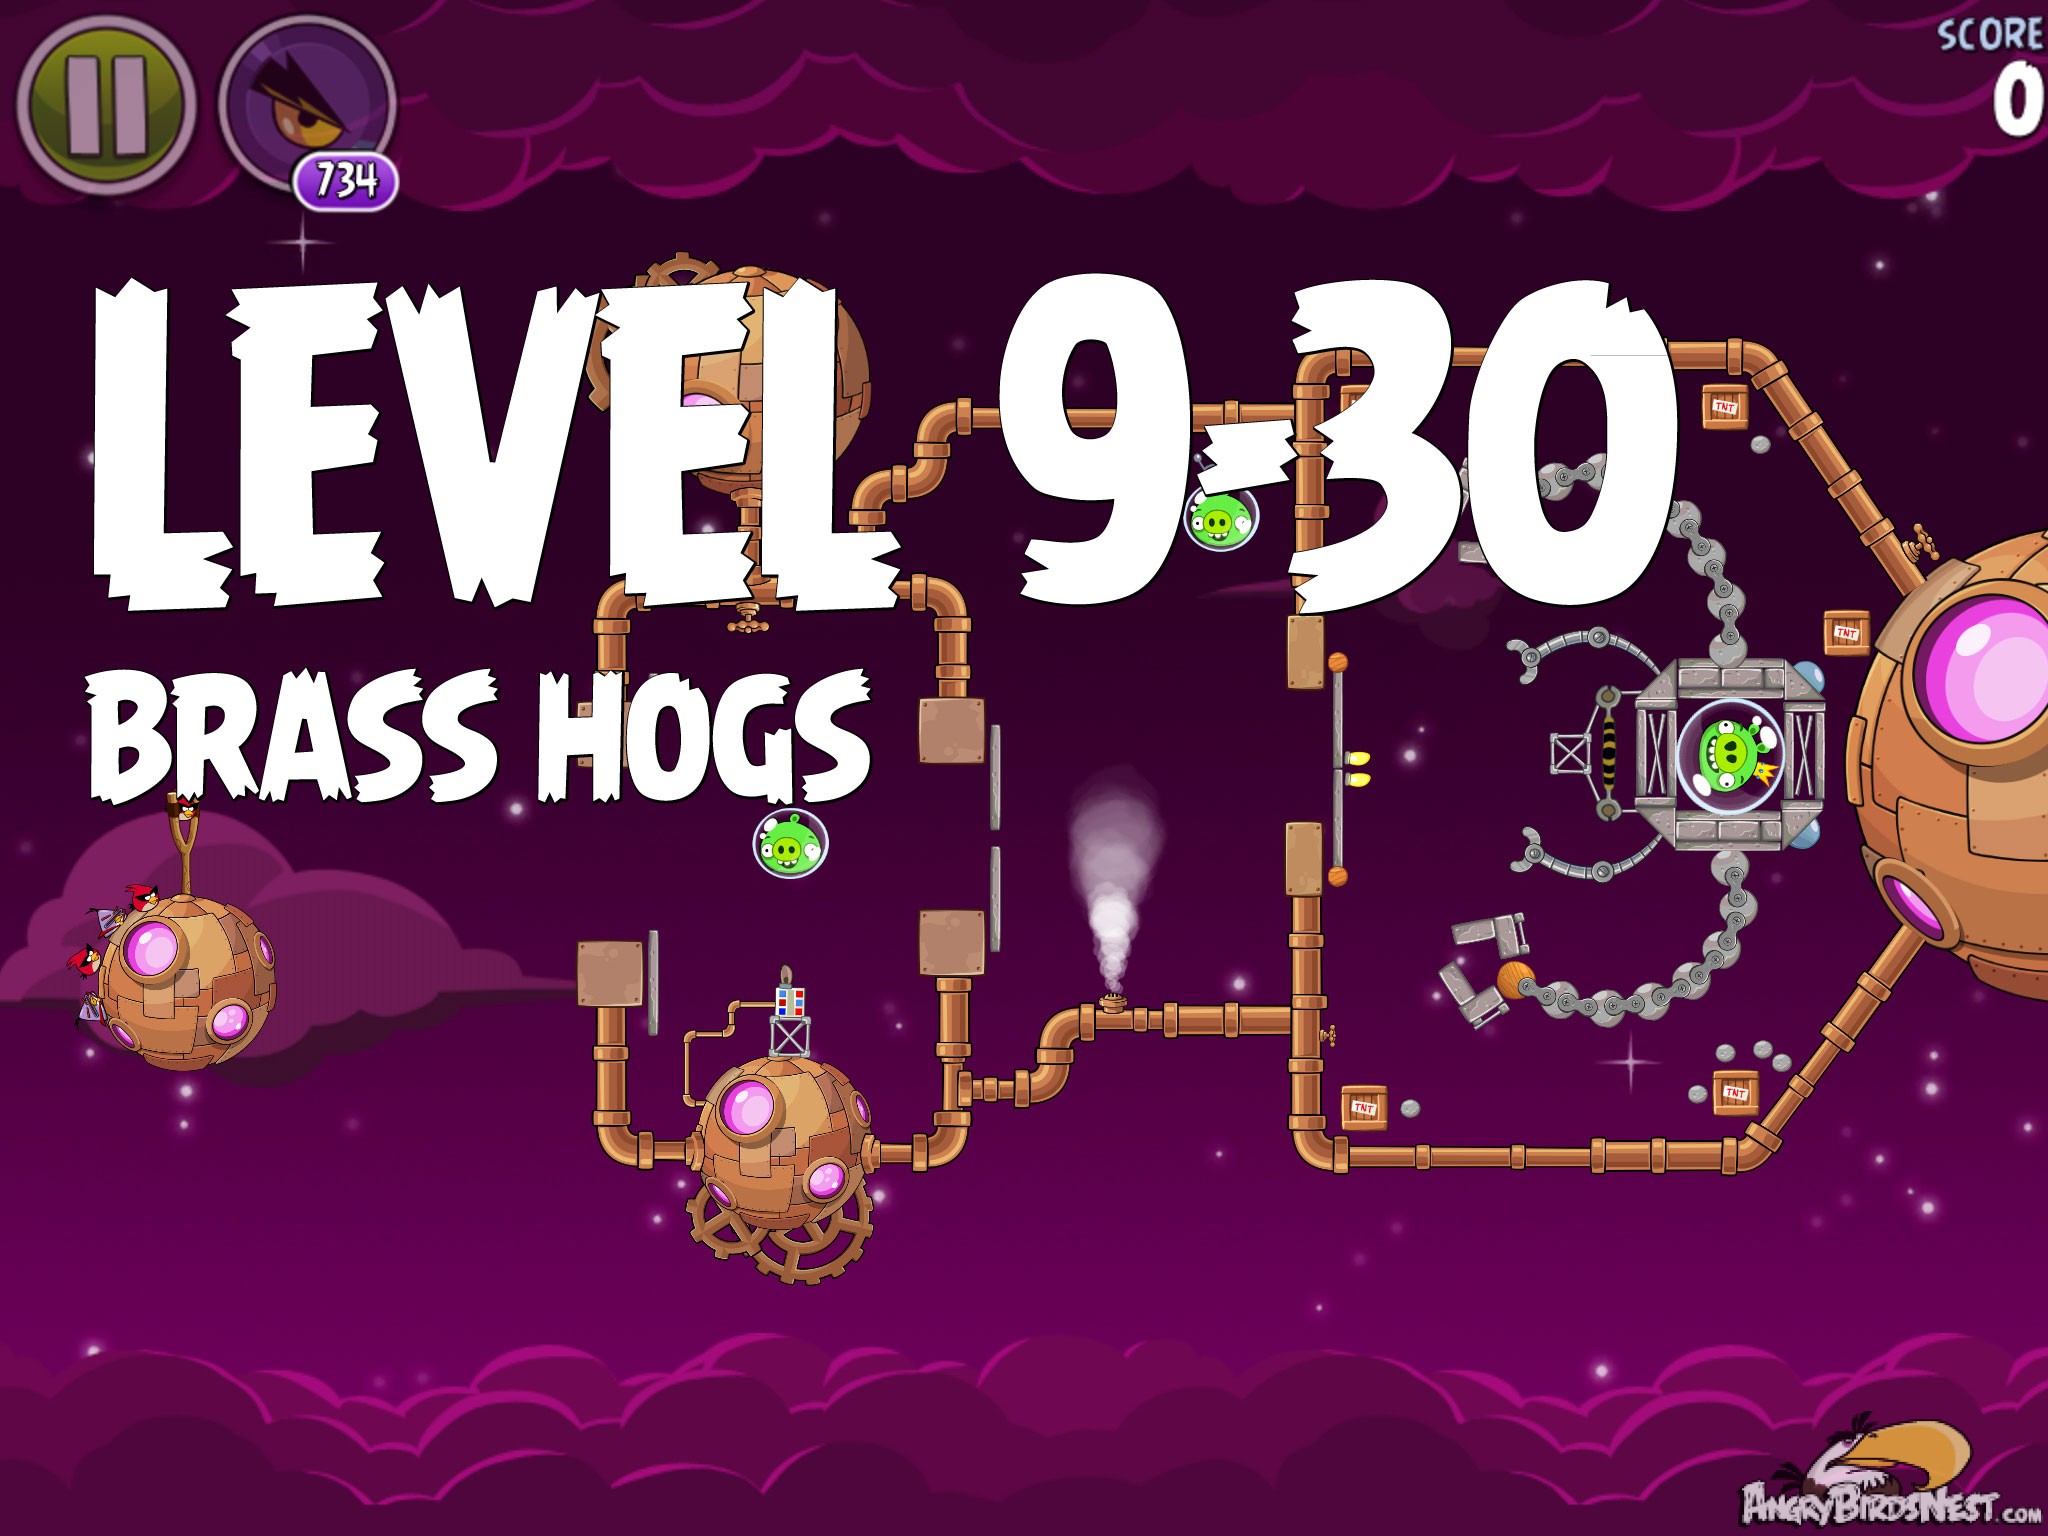 Angry Birds Space Brass Hogs Level 9-30